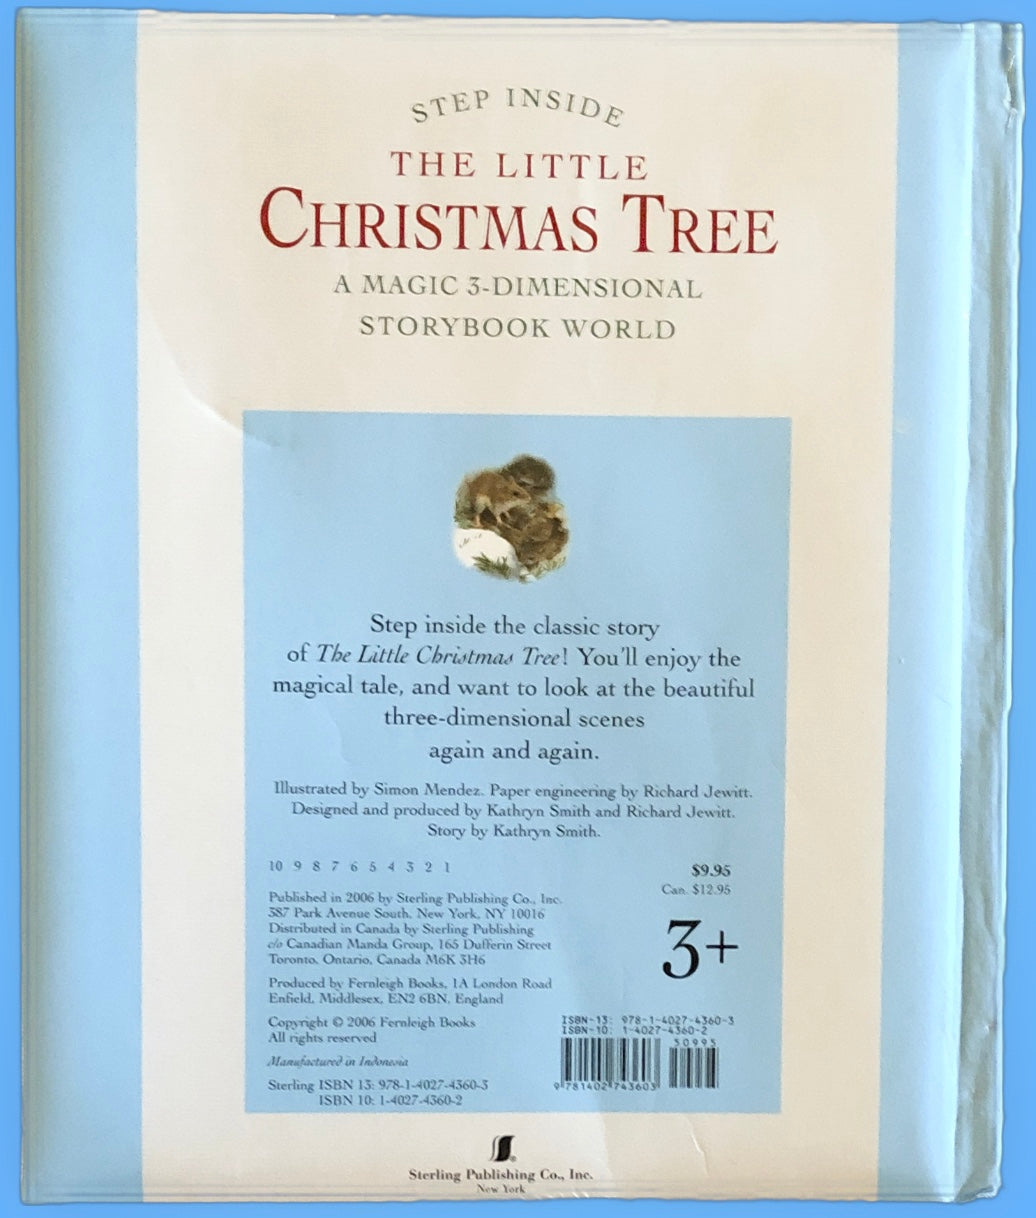 The Little Christmas Tree: A Magic 3-Dimensional Storybook World